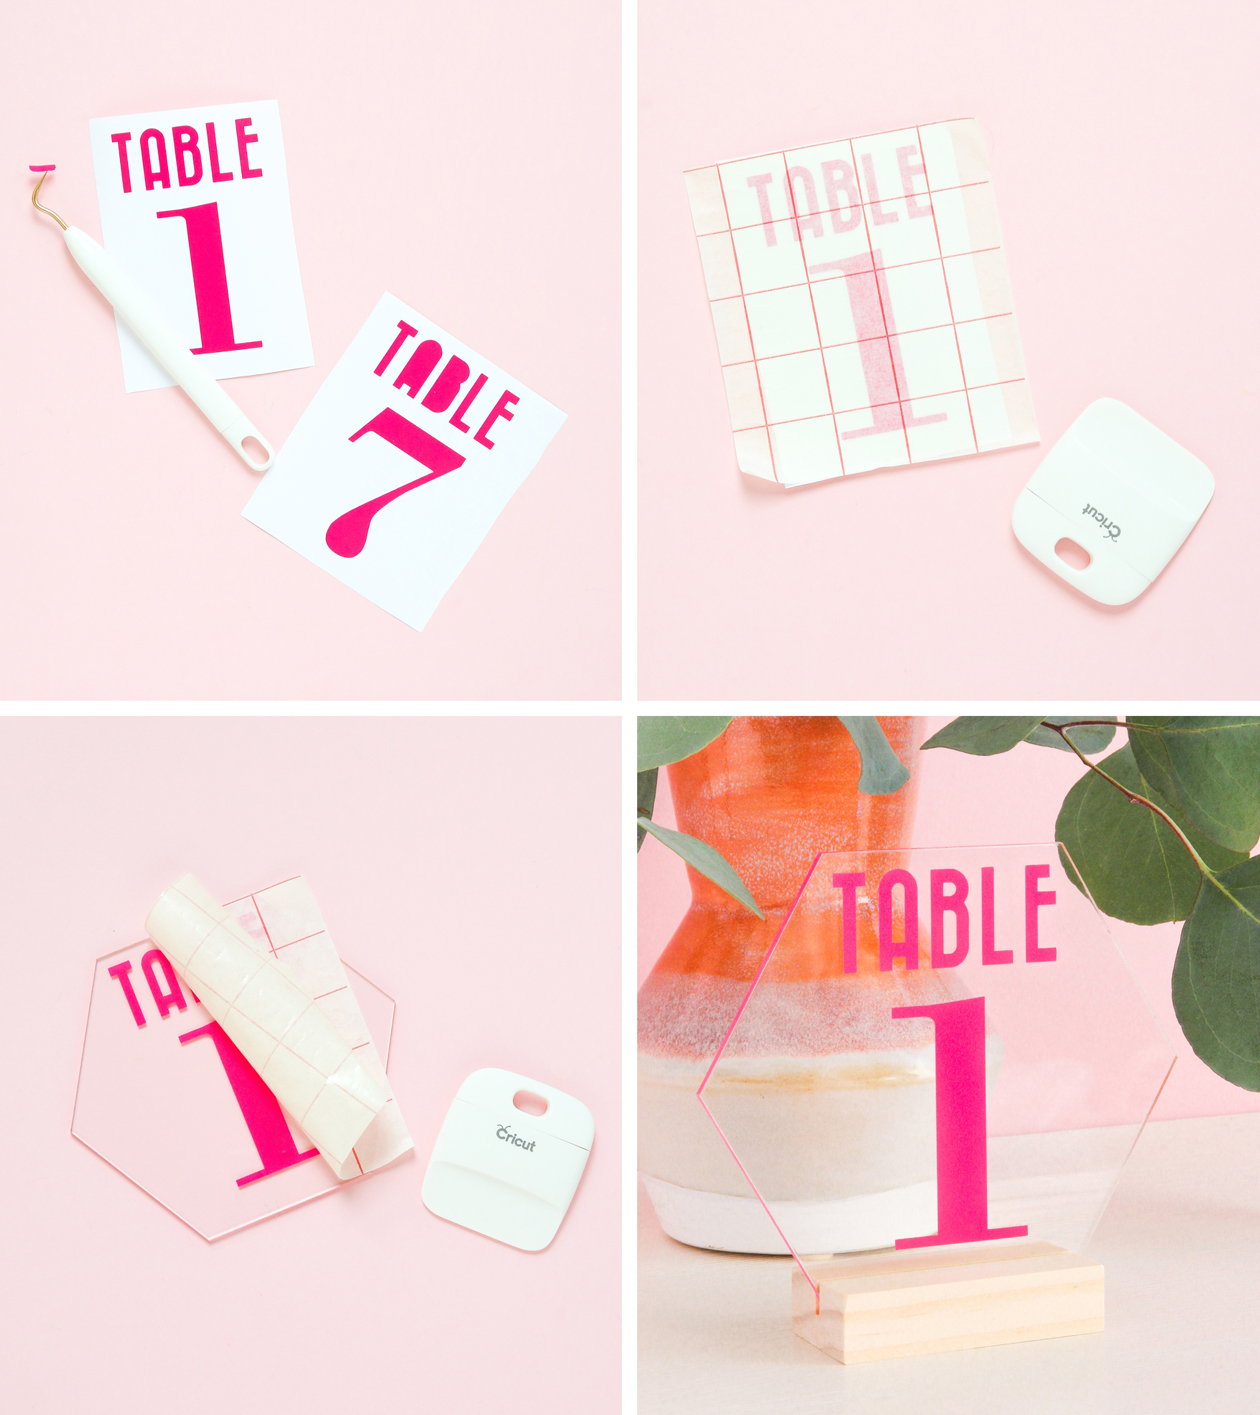 Learn how to make your own colorful wedding decor with this table number download! Grab the SVG file then start crafting your wedding decor today!